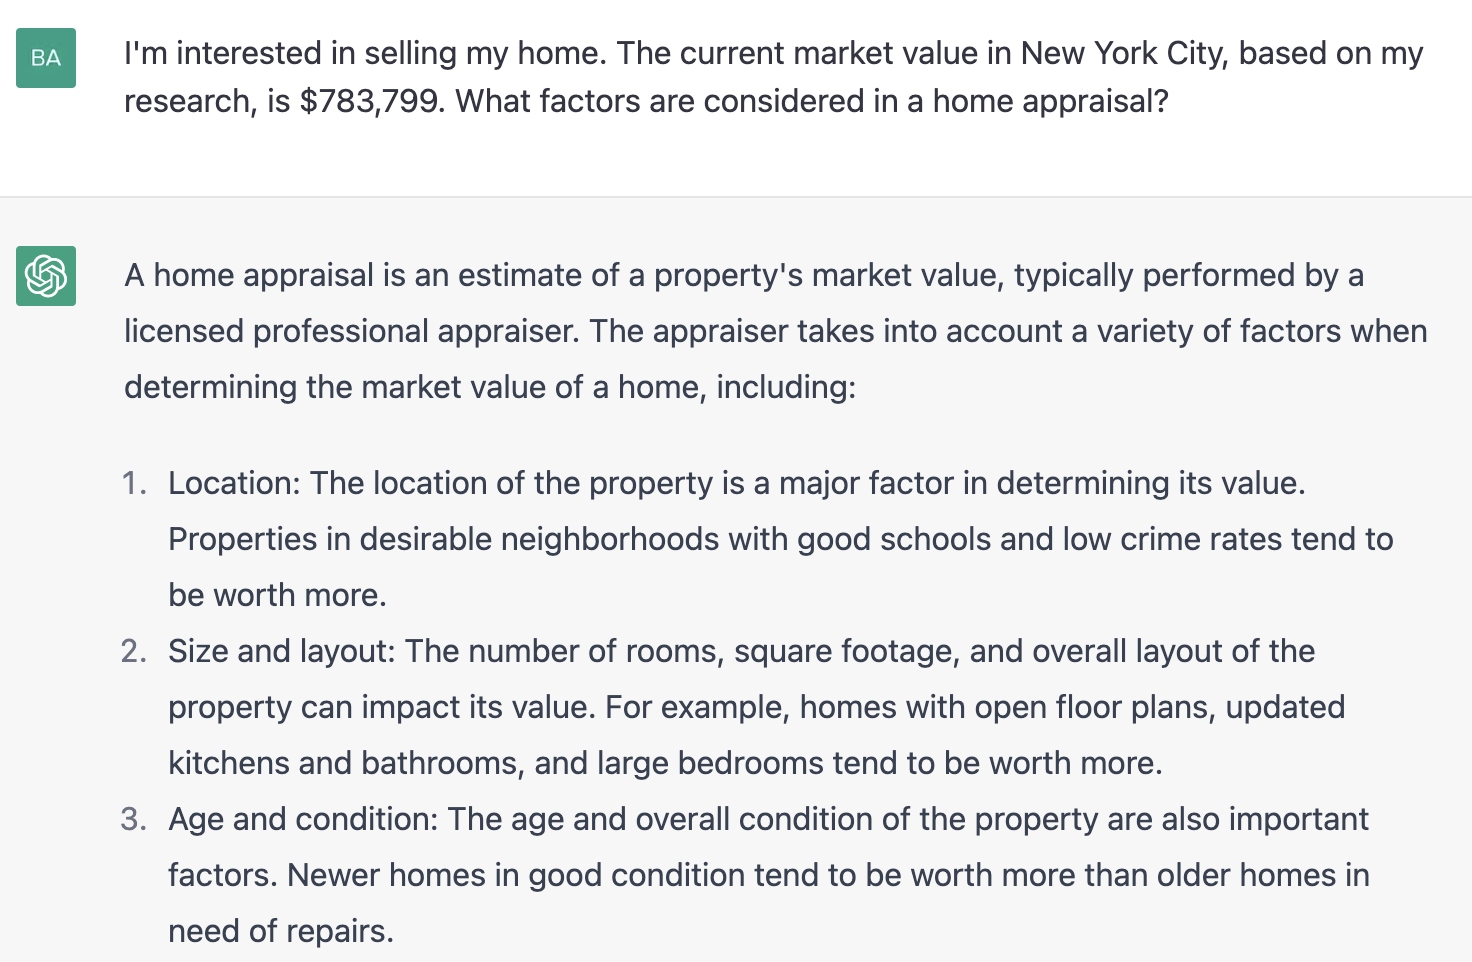 ChatGPT prompt about what factors are considered in a home appraisal